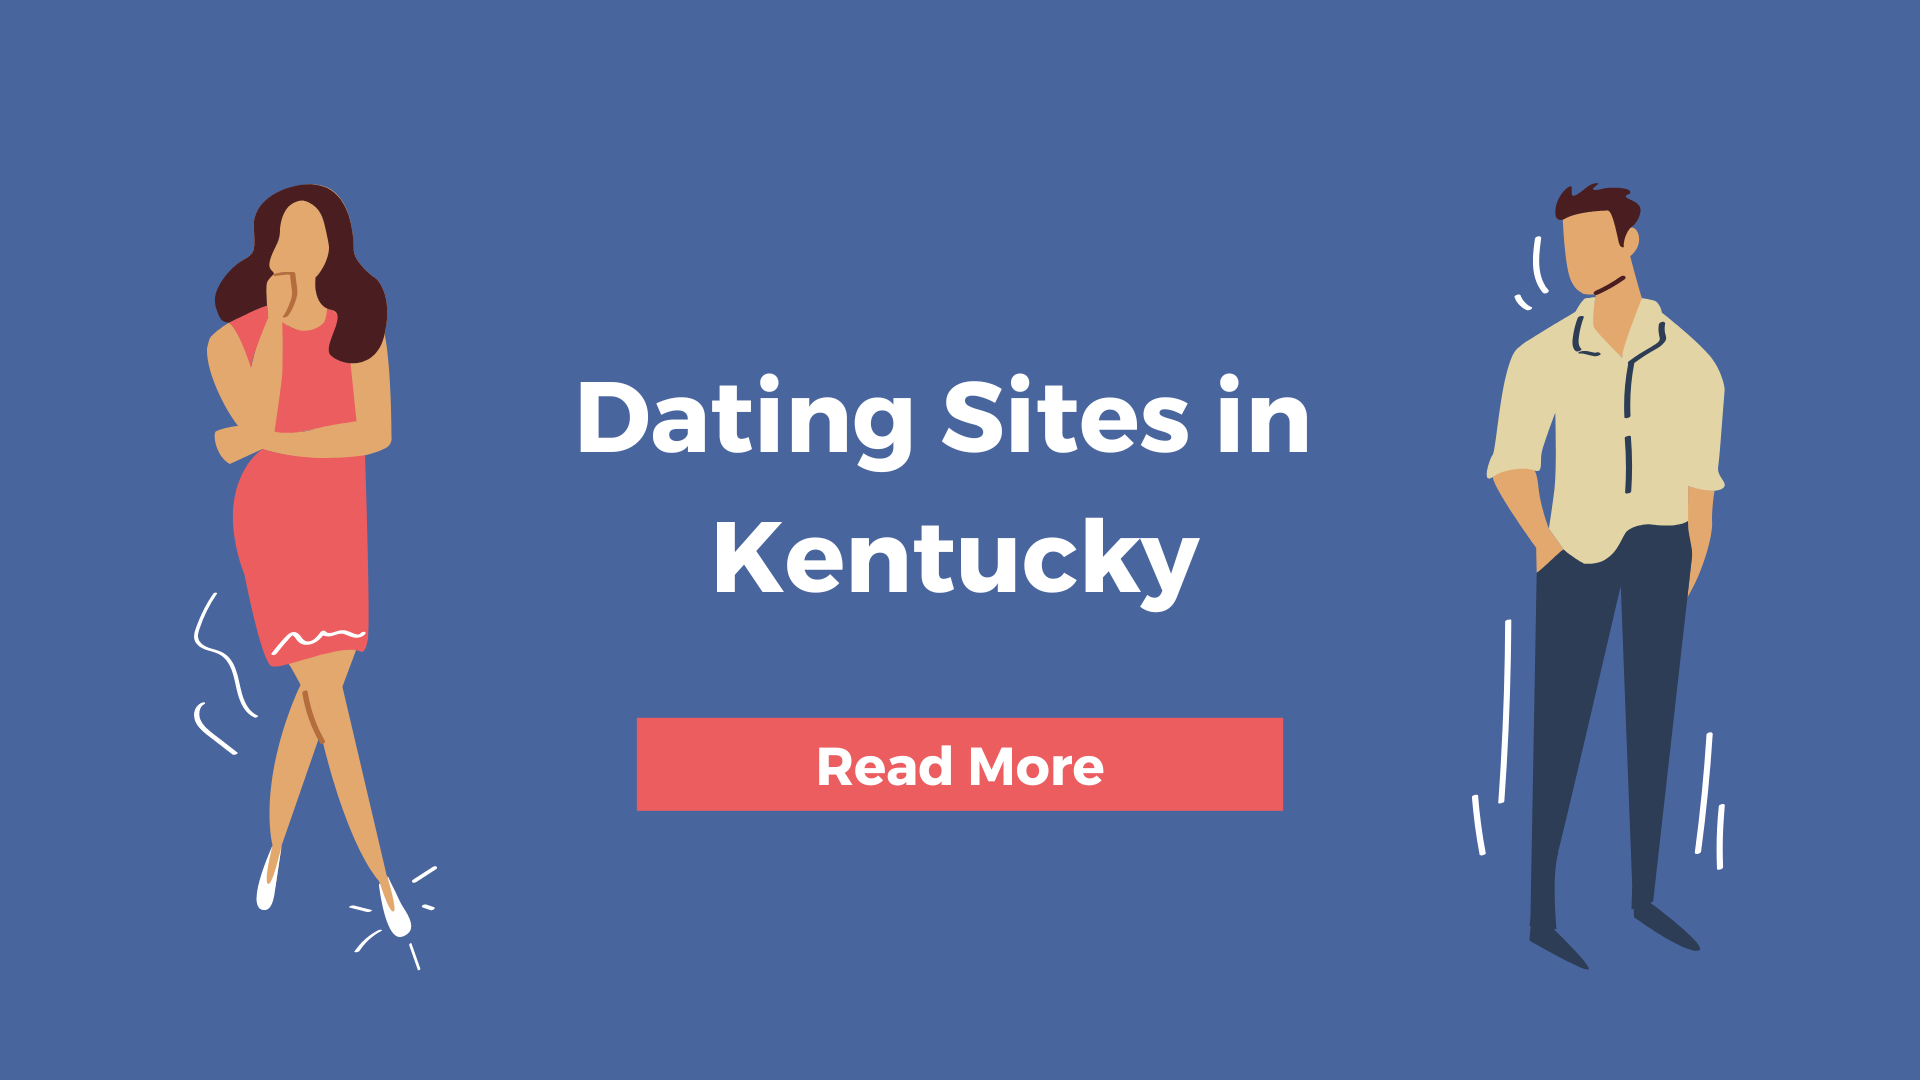 Dating Sites in Kentucky